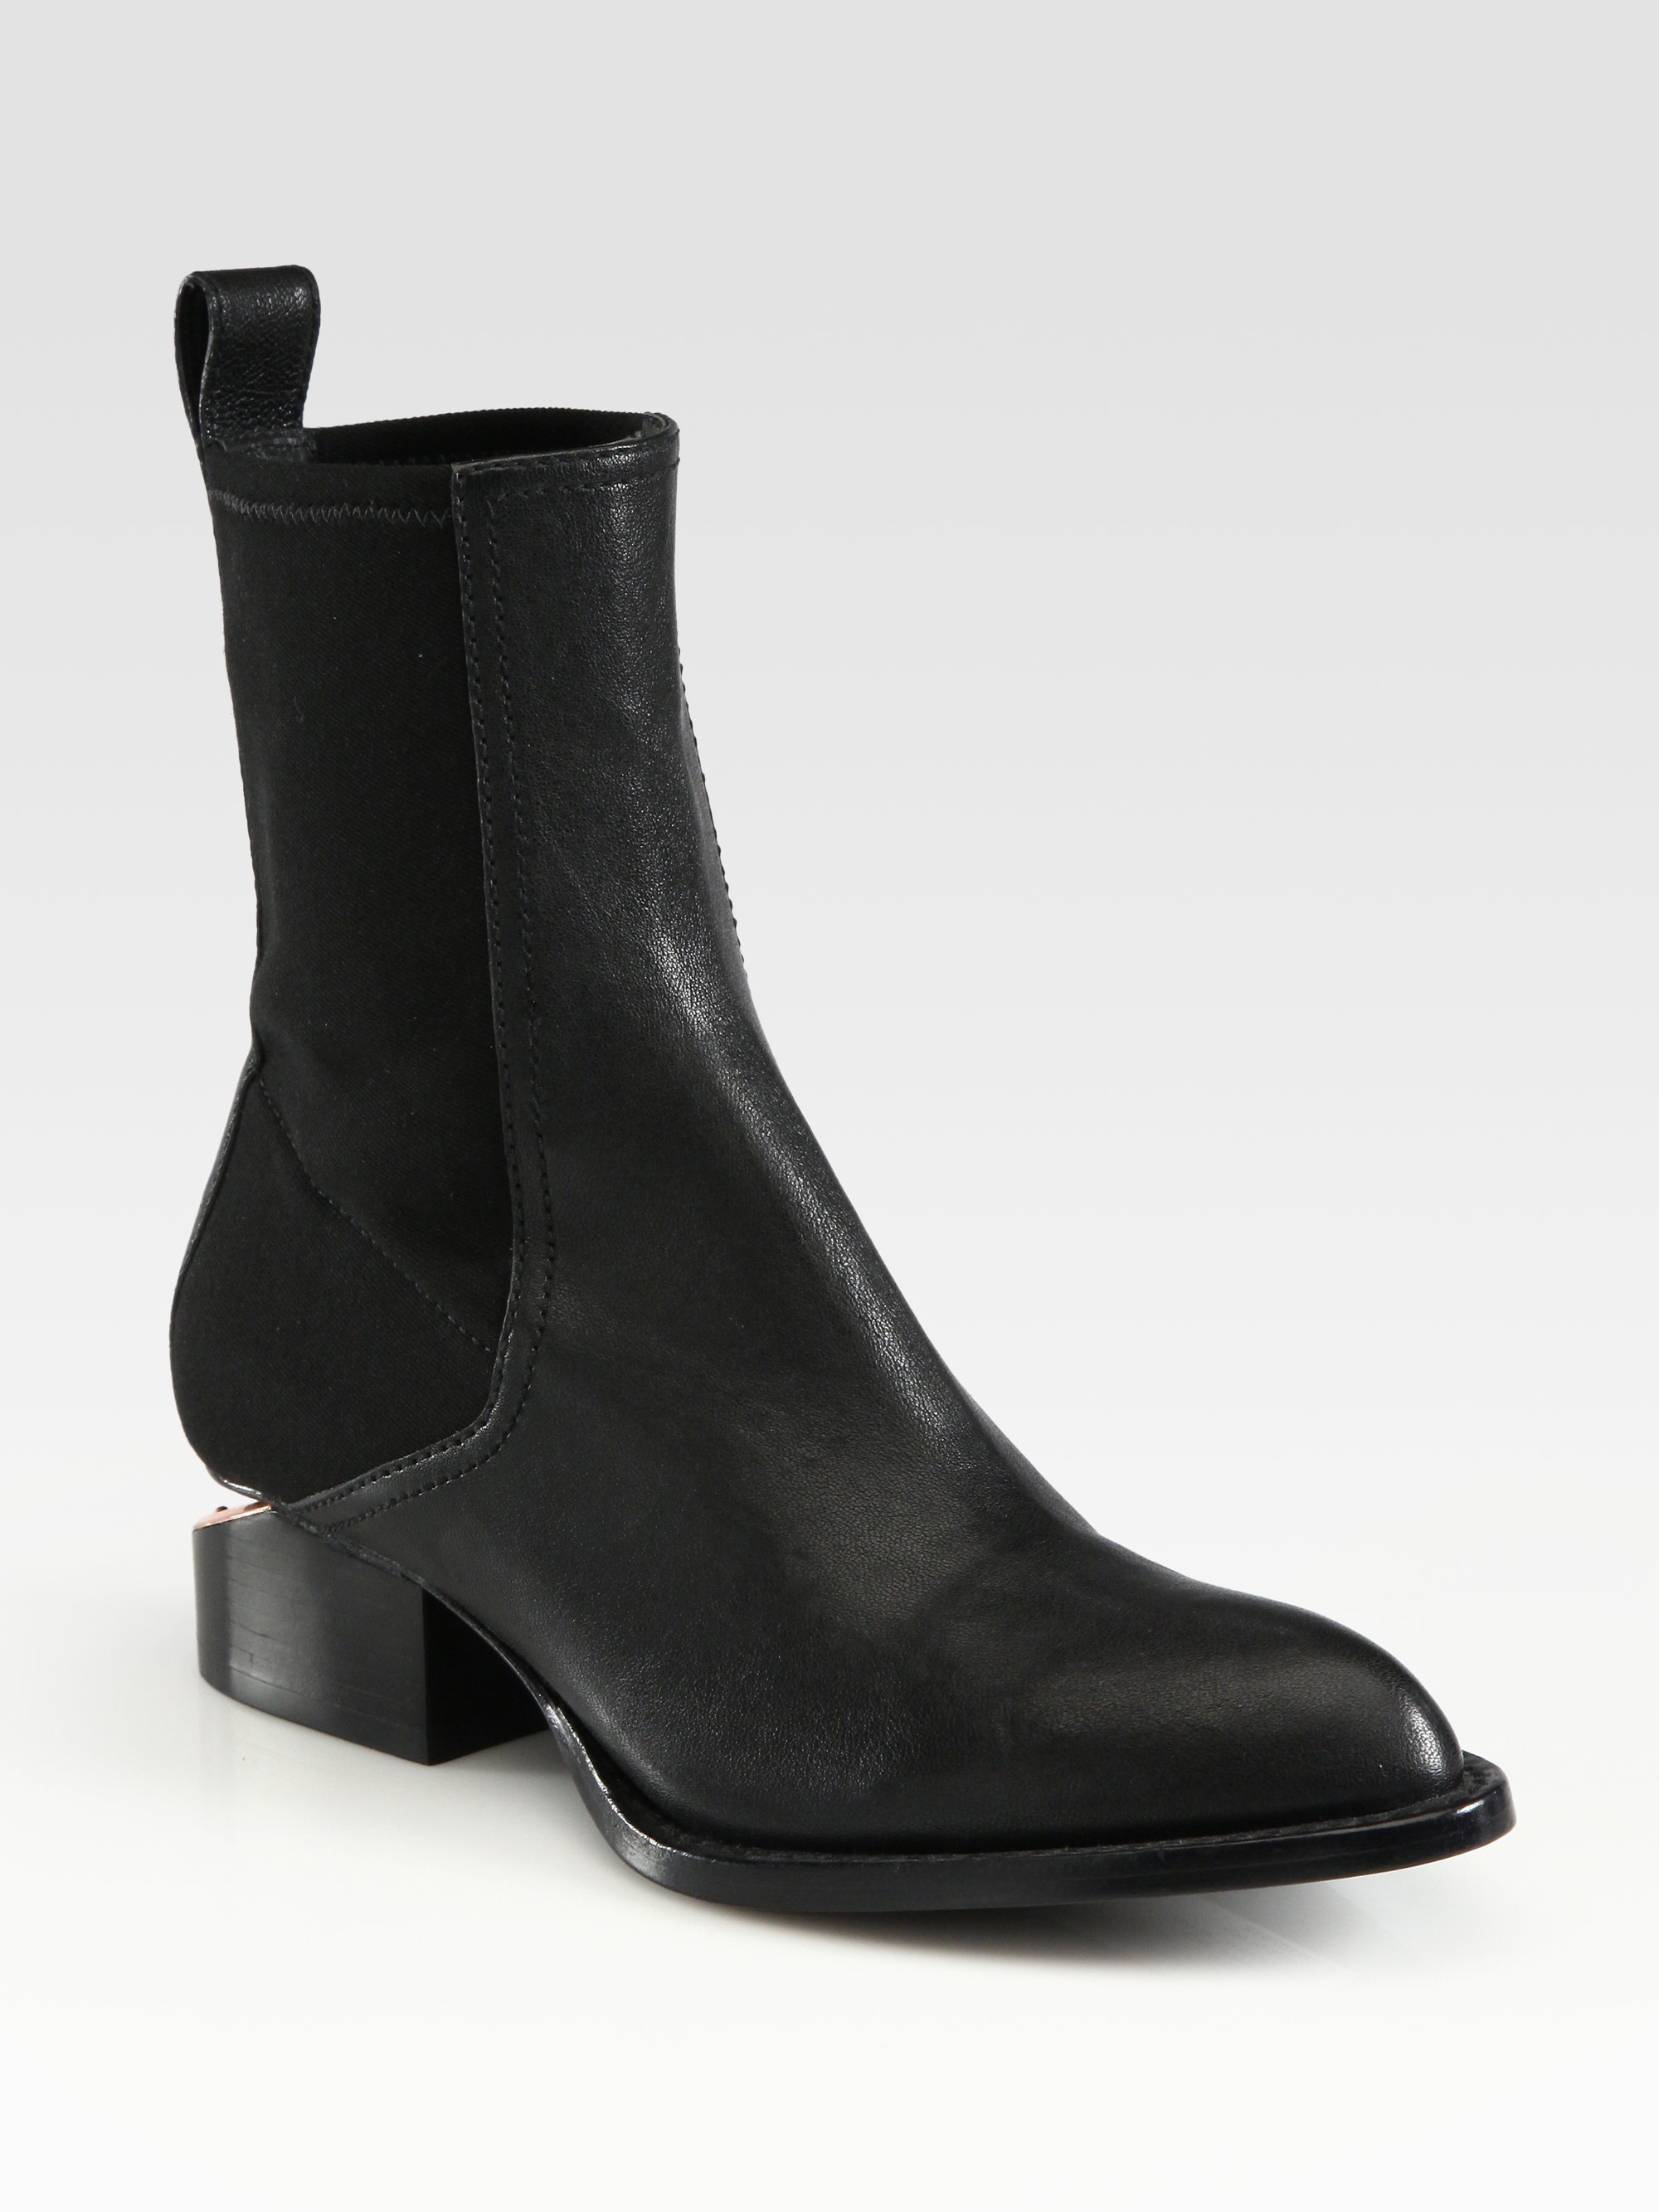 Lyst - Alexander Wang Anouck Chelsea Leather Ankle Boots in Black